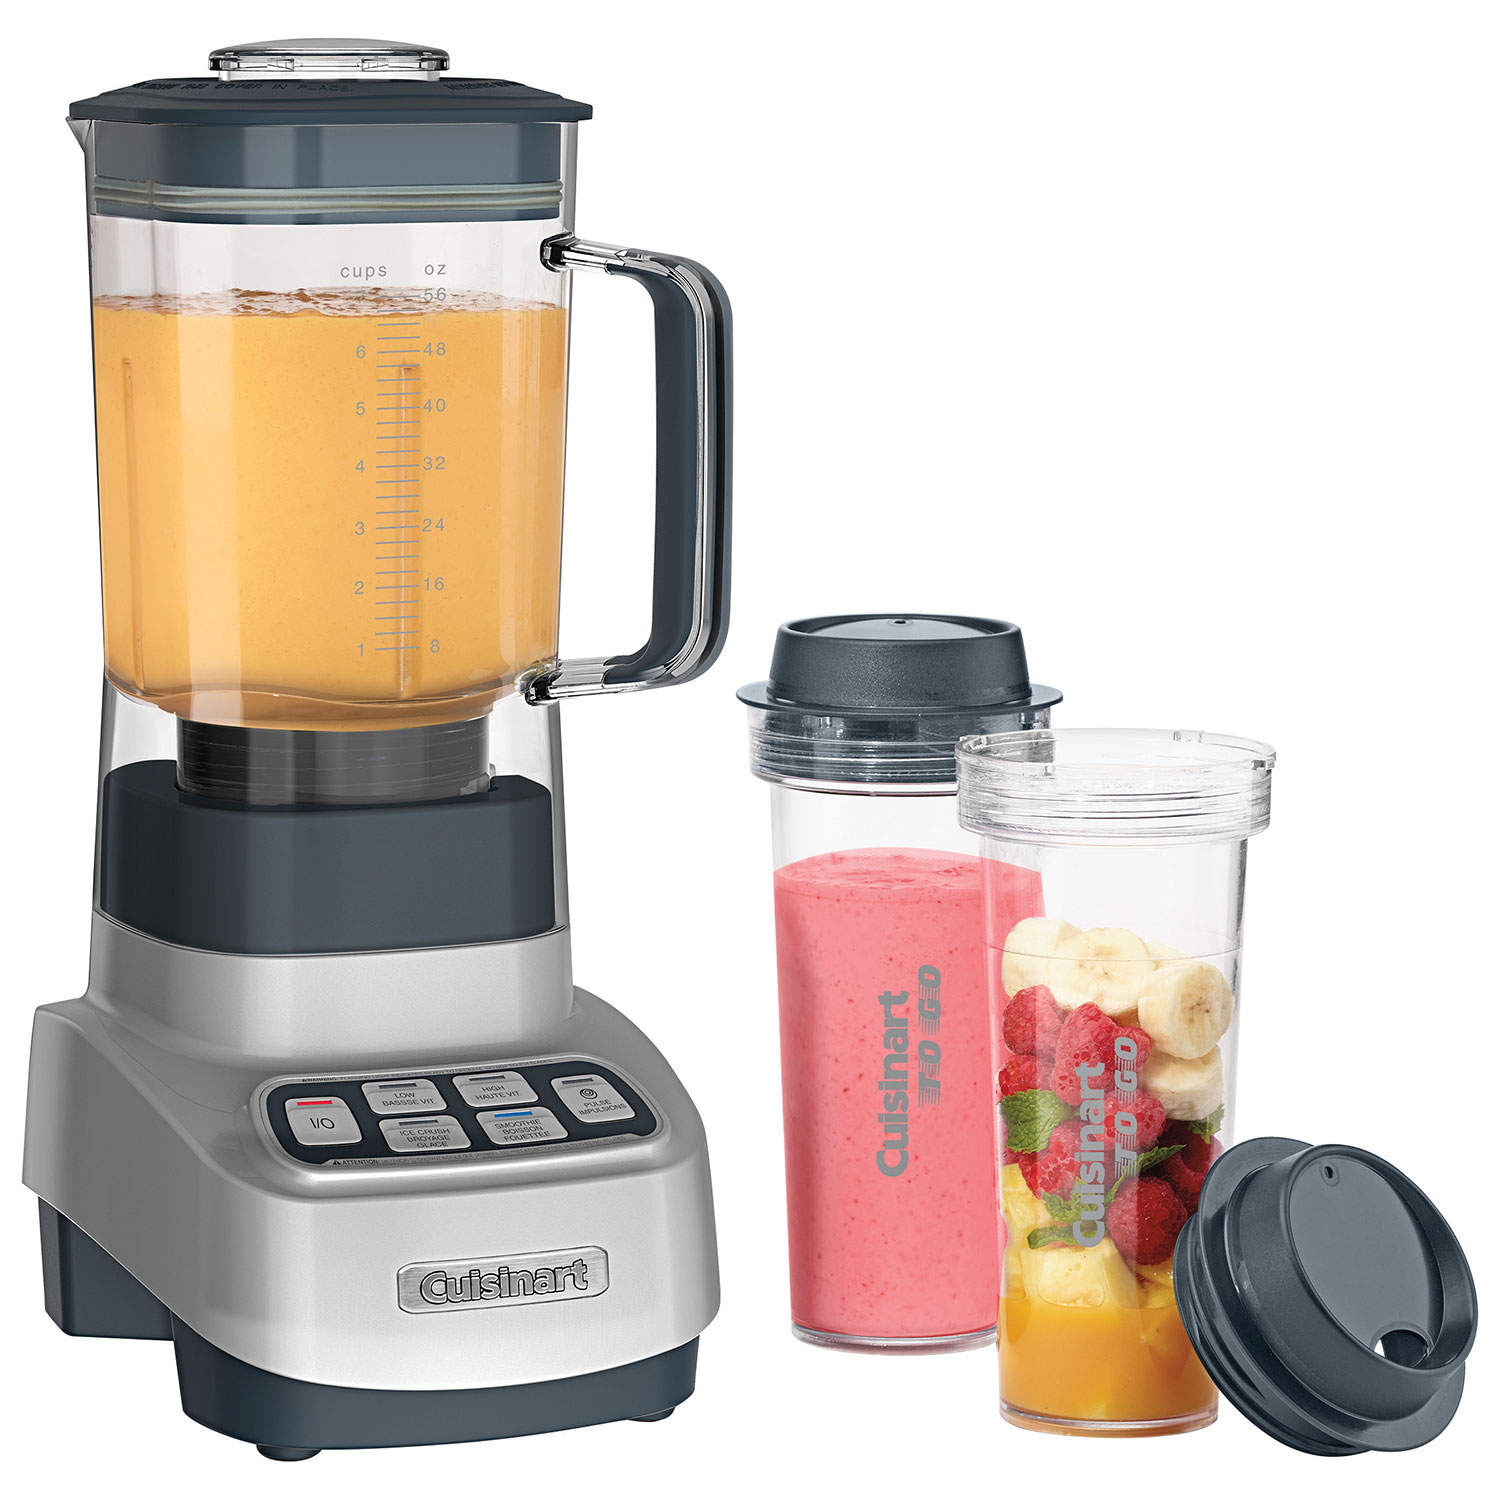 Where can you find reviews of the Dash Blender?